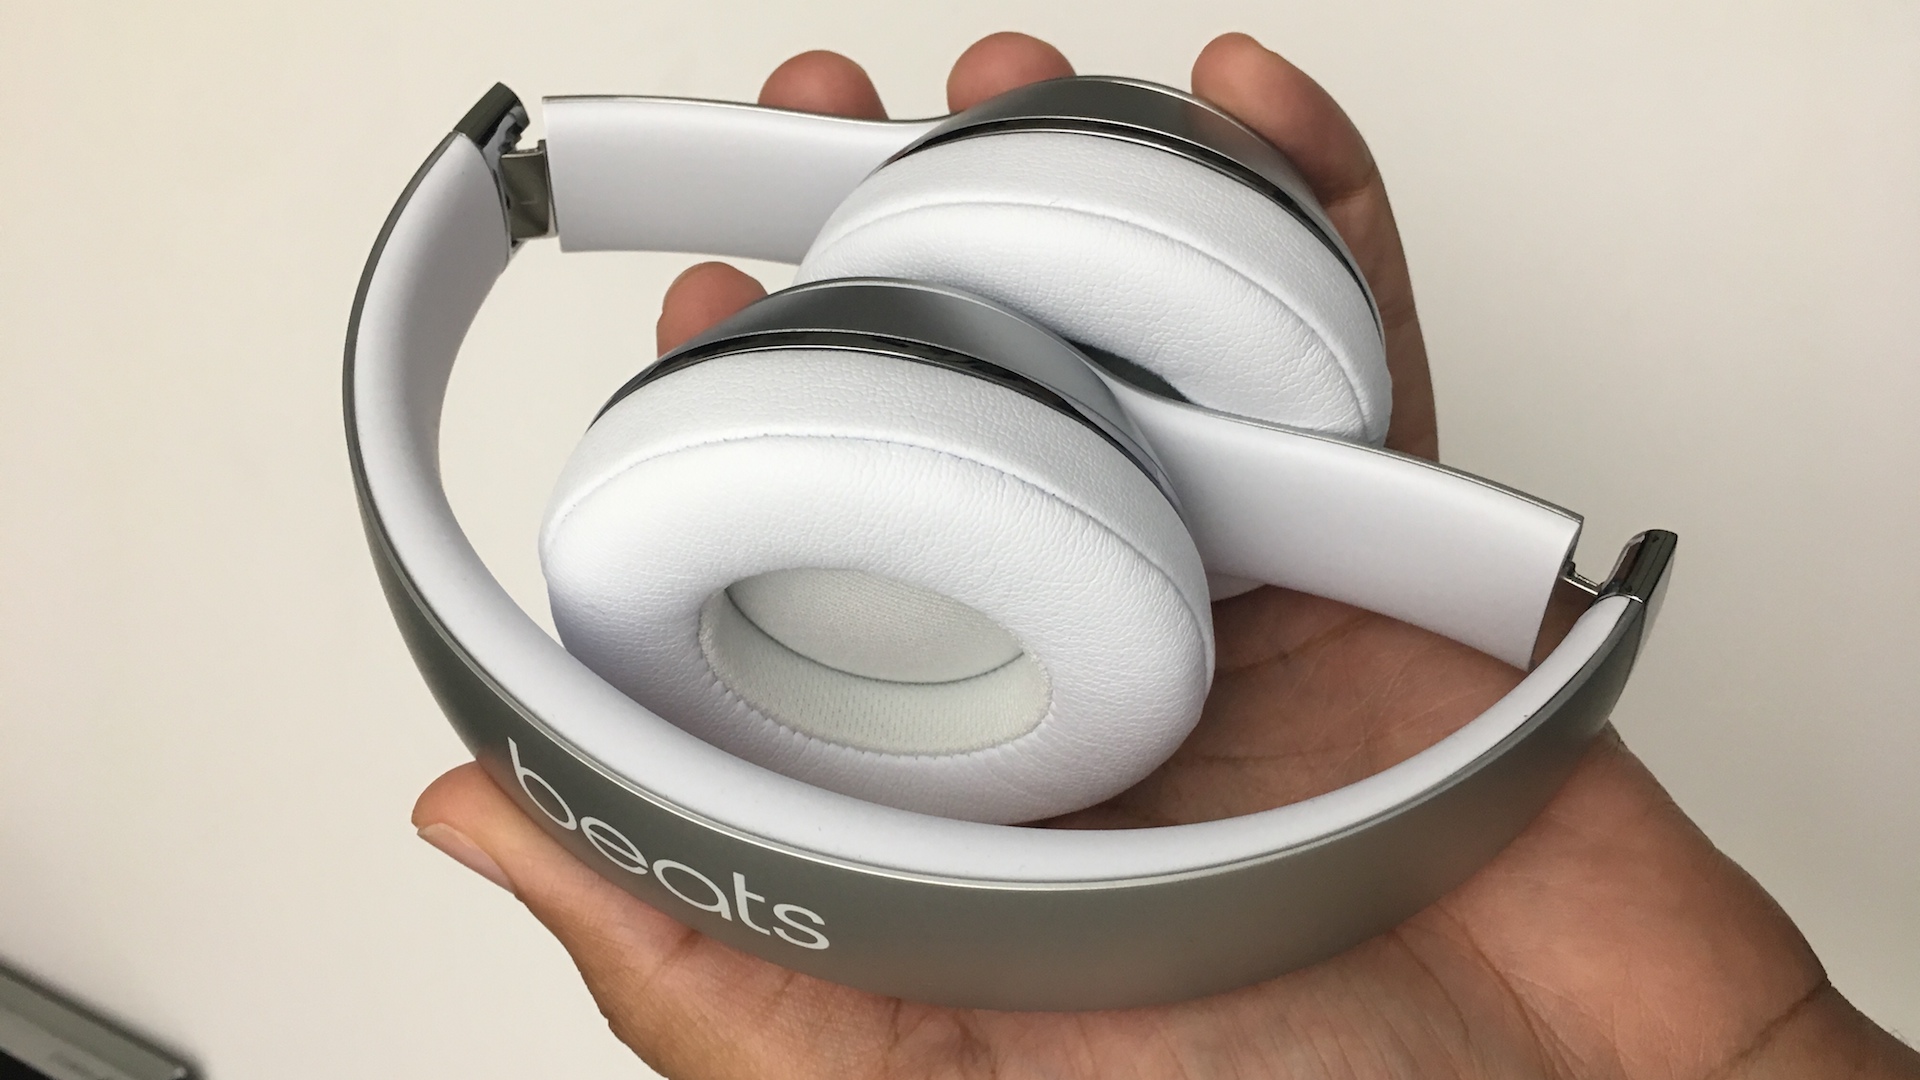 Beats Solo3 Headphones Review: Style Leads The Way